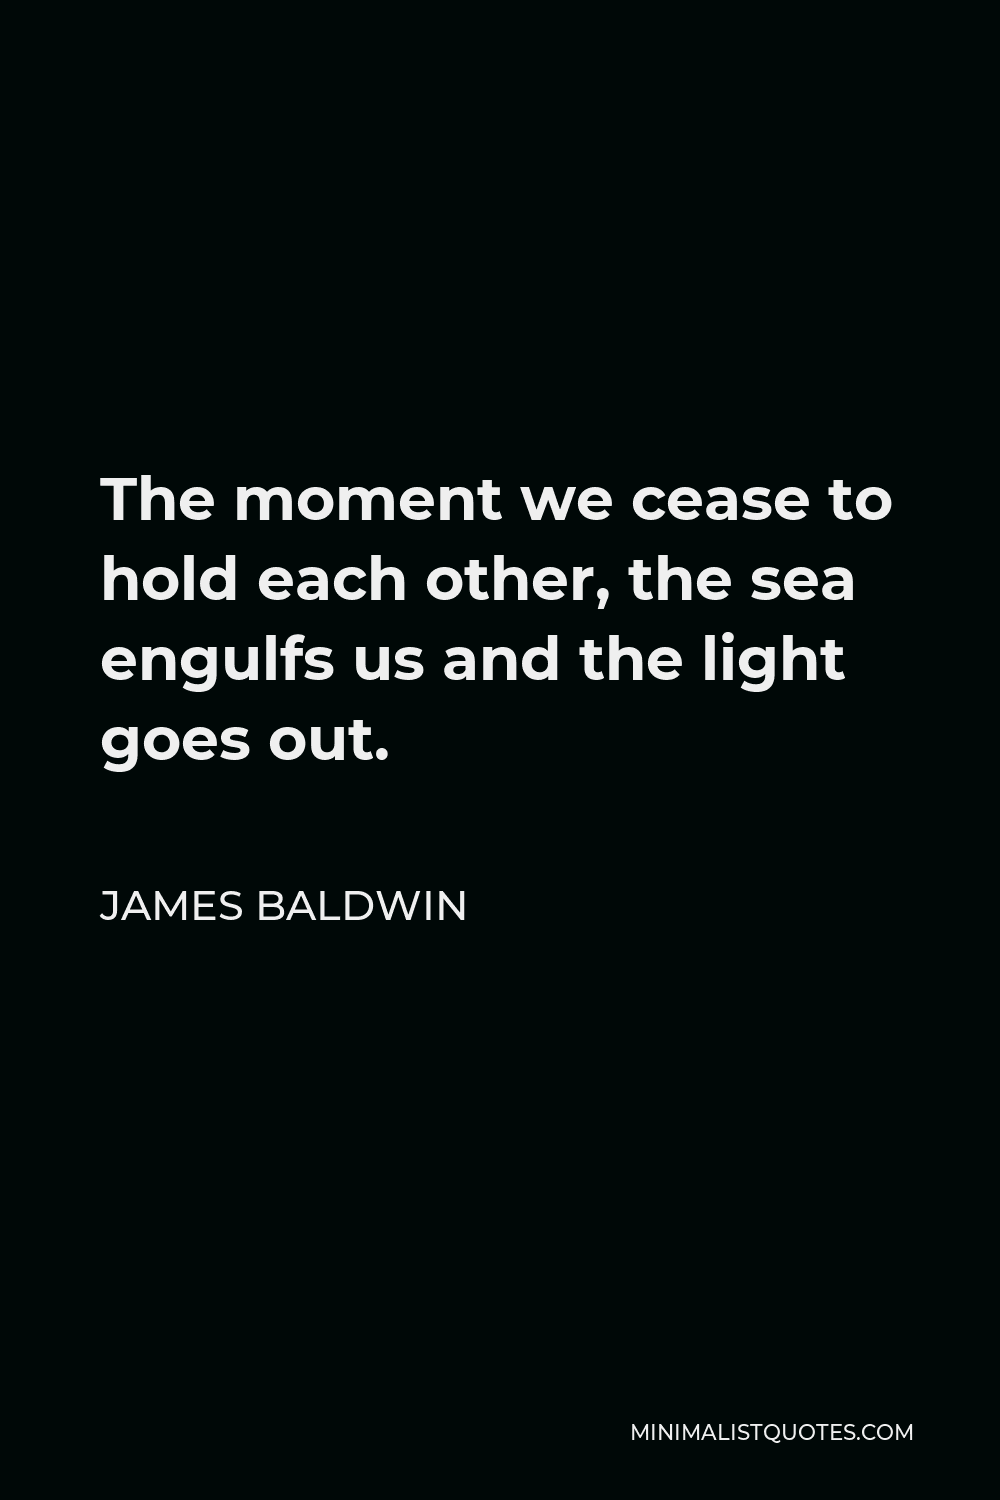 James Baldwin Quote - The moment we cease to hold each other, the sea engulfs us and the light goes out.